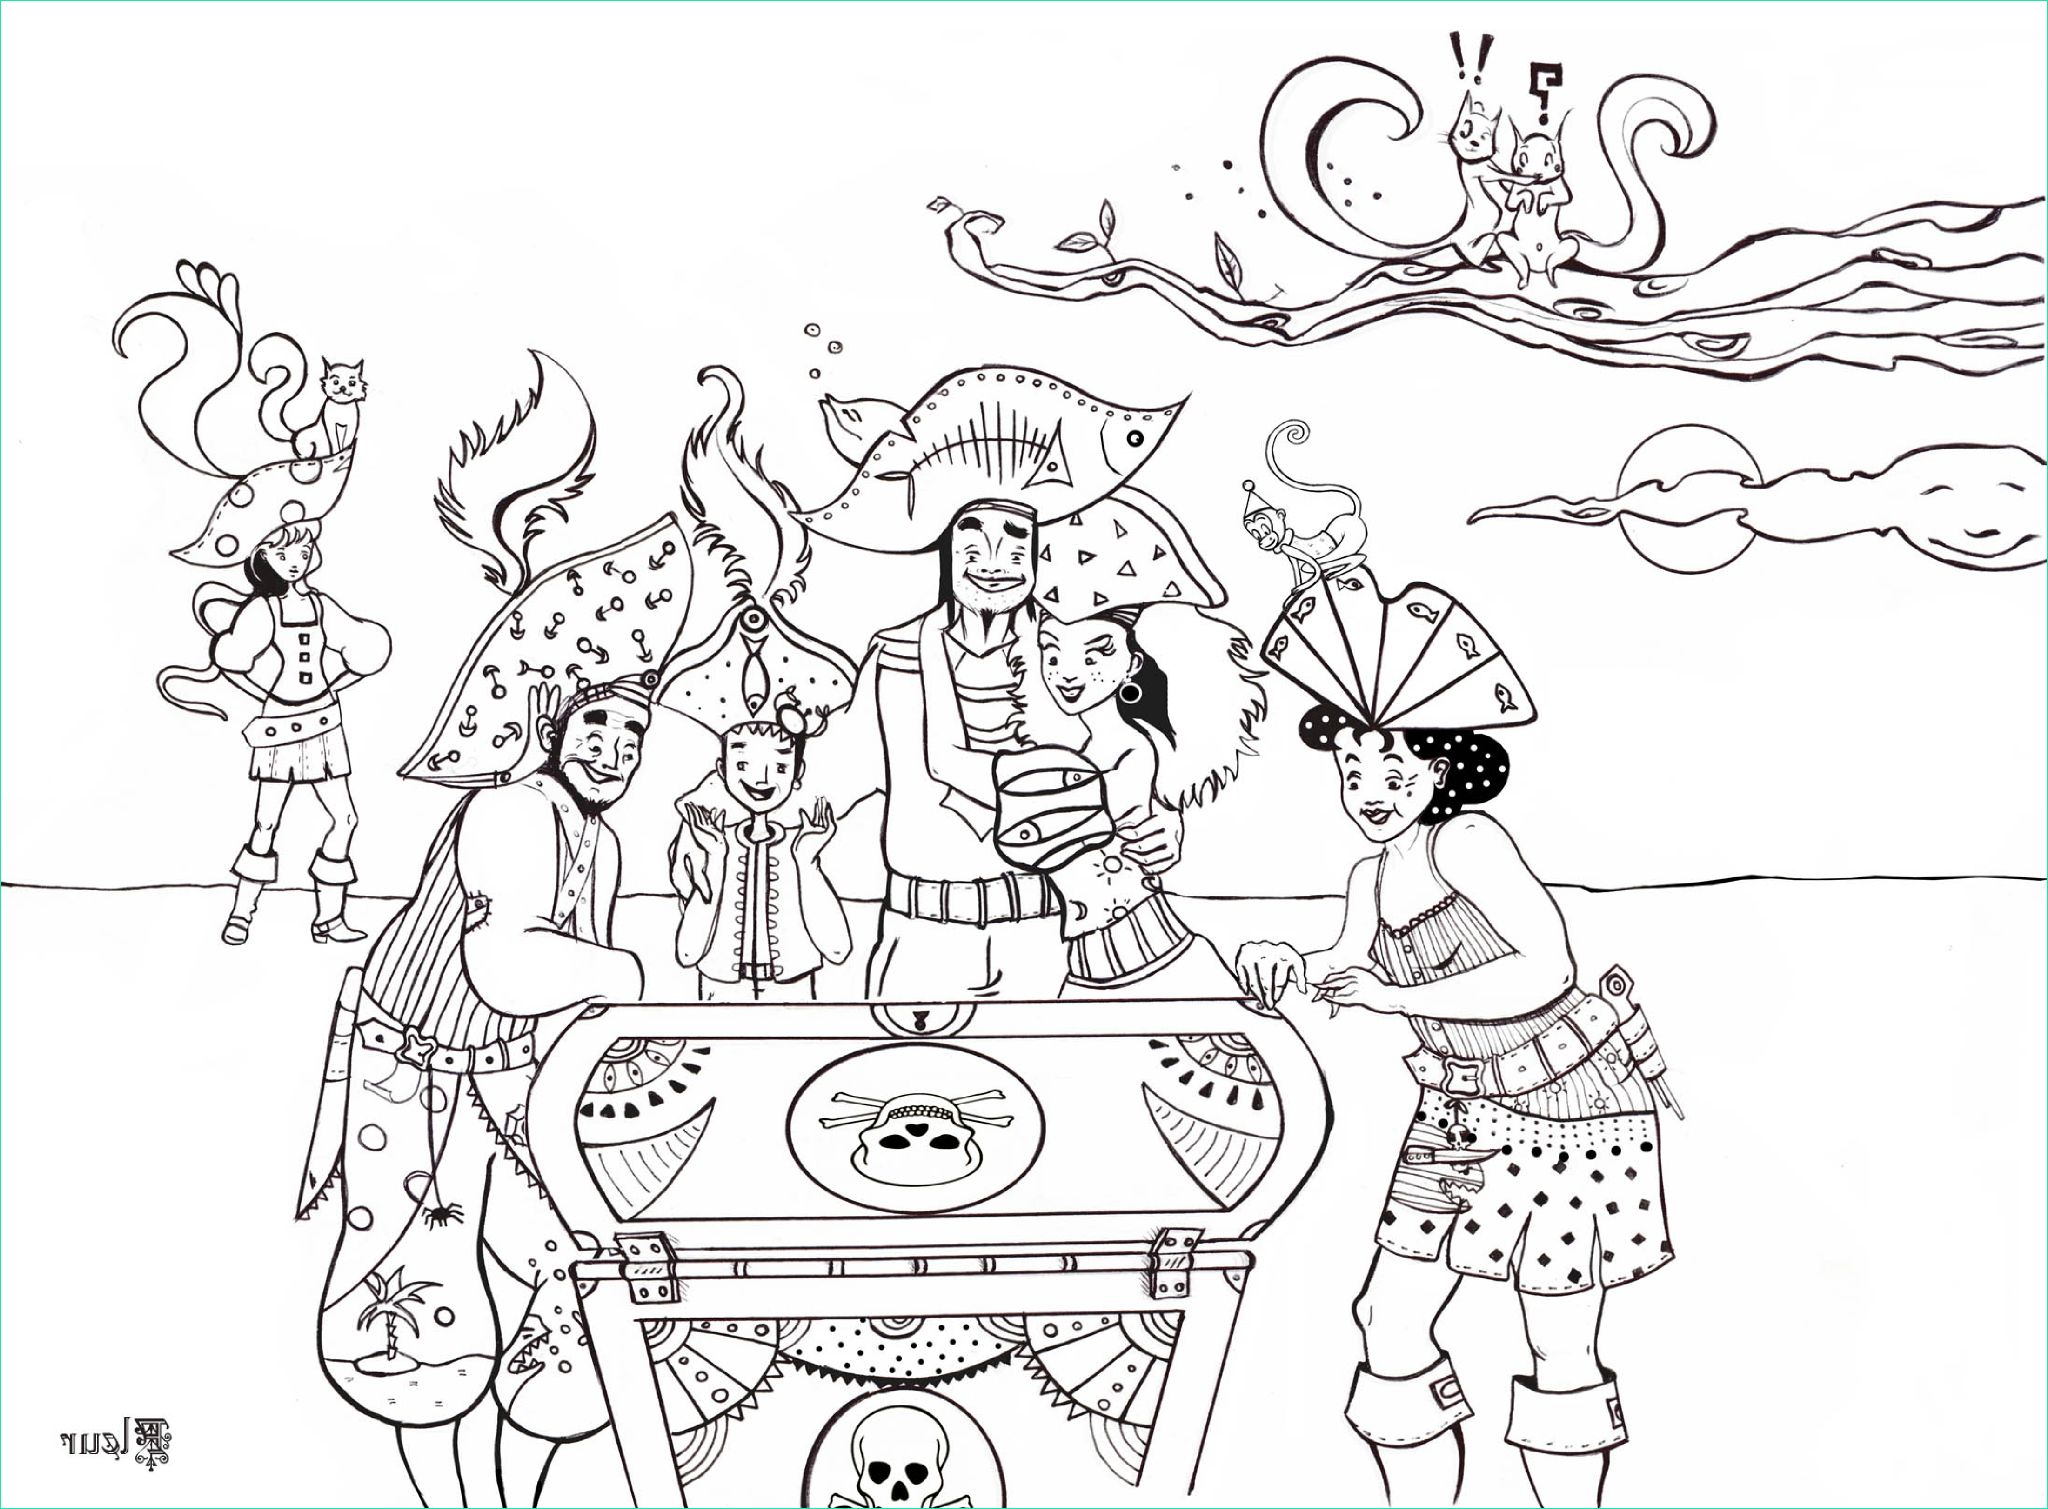 Pirate Coloriage Nouveau Collection Pirates Free to Color for Kids Pirates Kids Coloring Pages